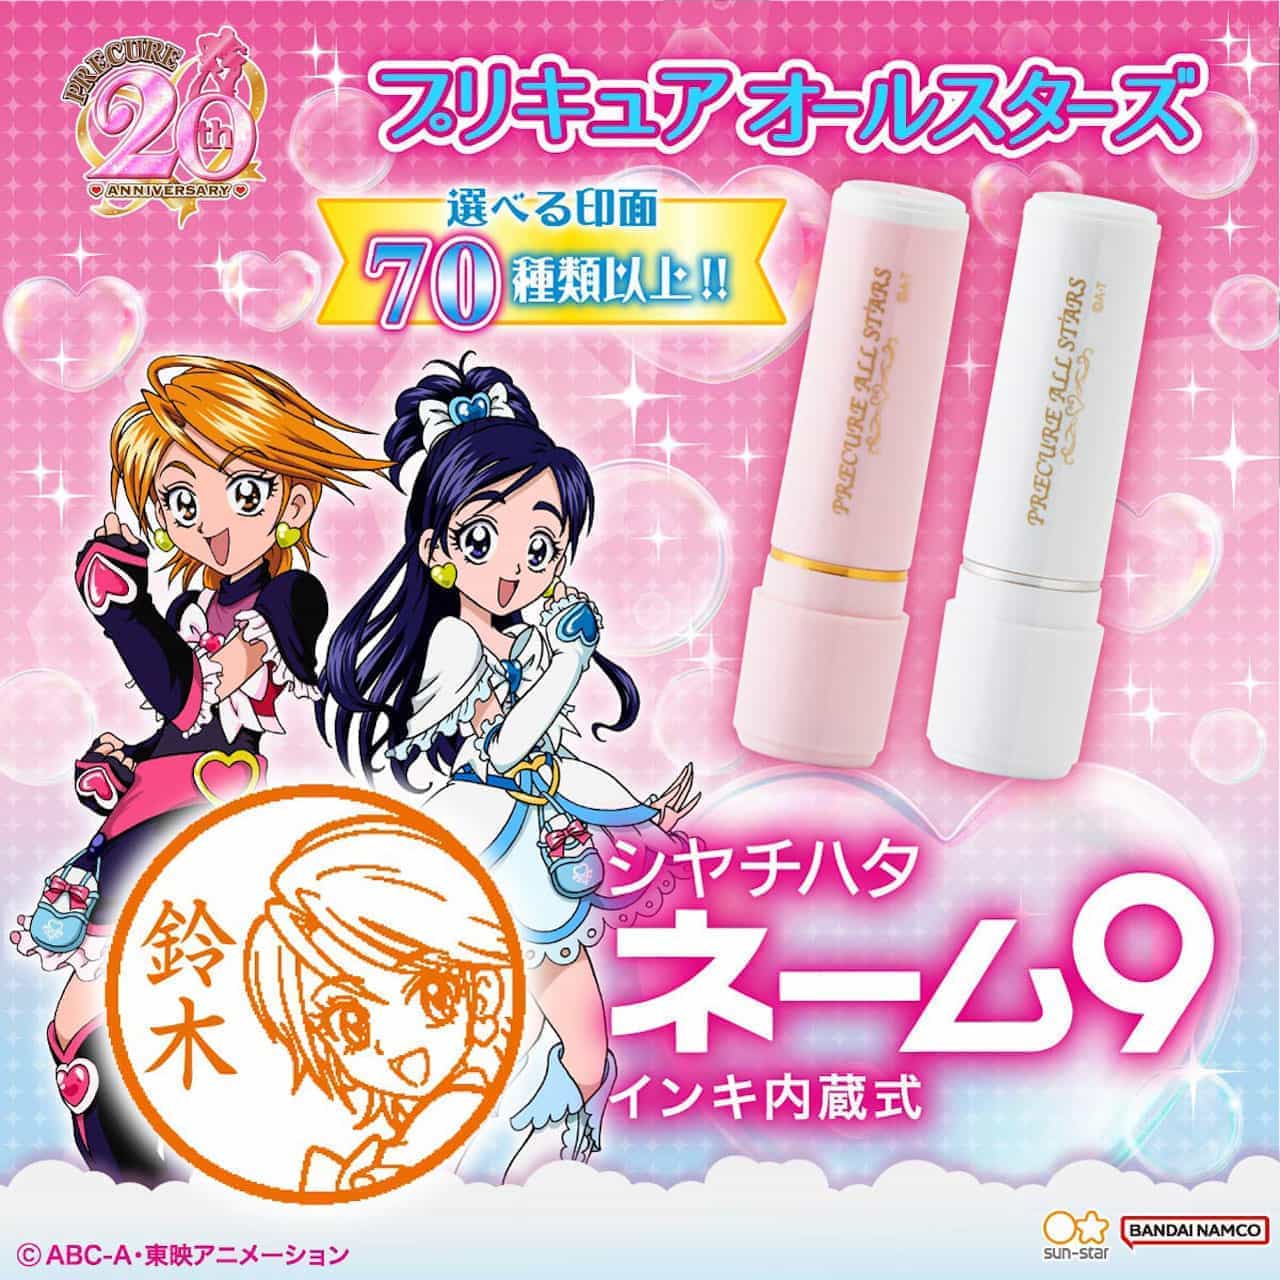 Pretty Cure All Stars Shachihata Name 9" from Sunstar Stationery